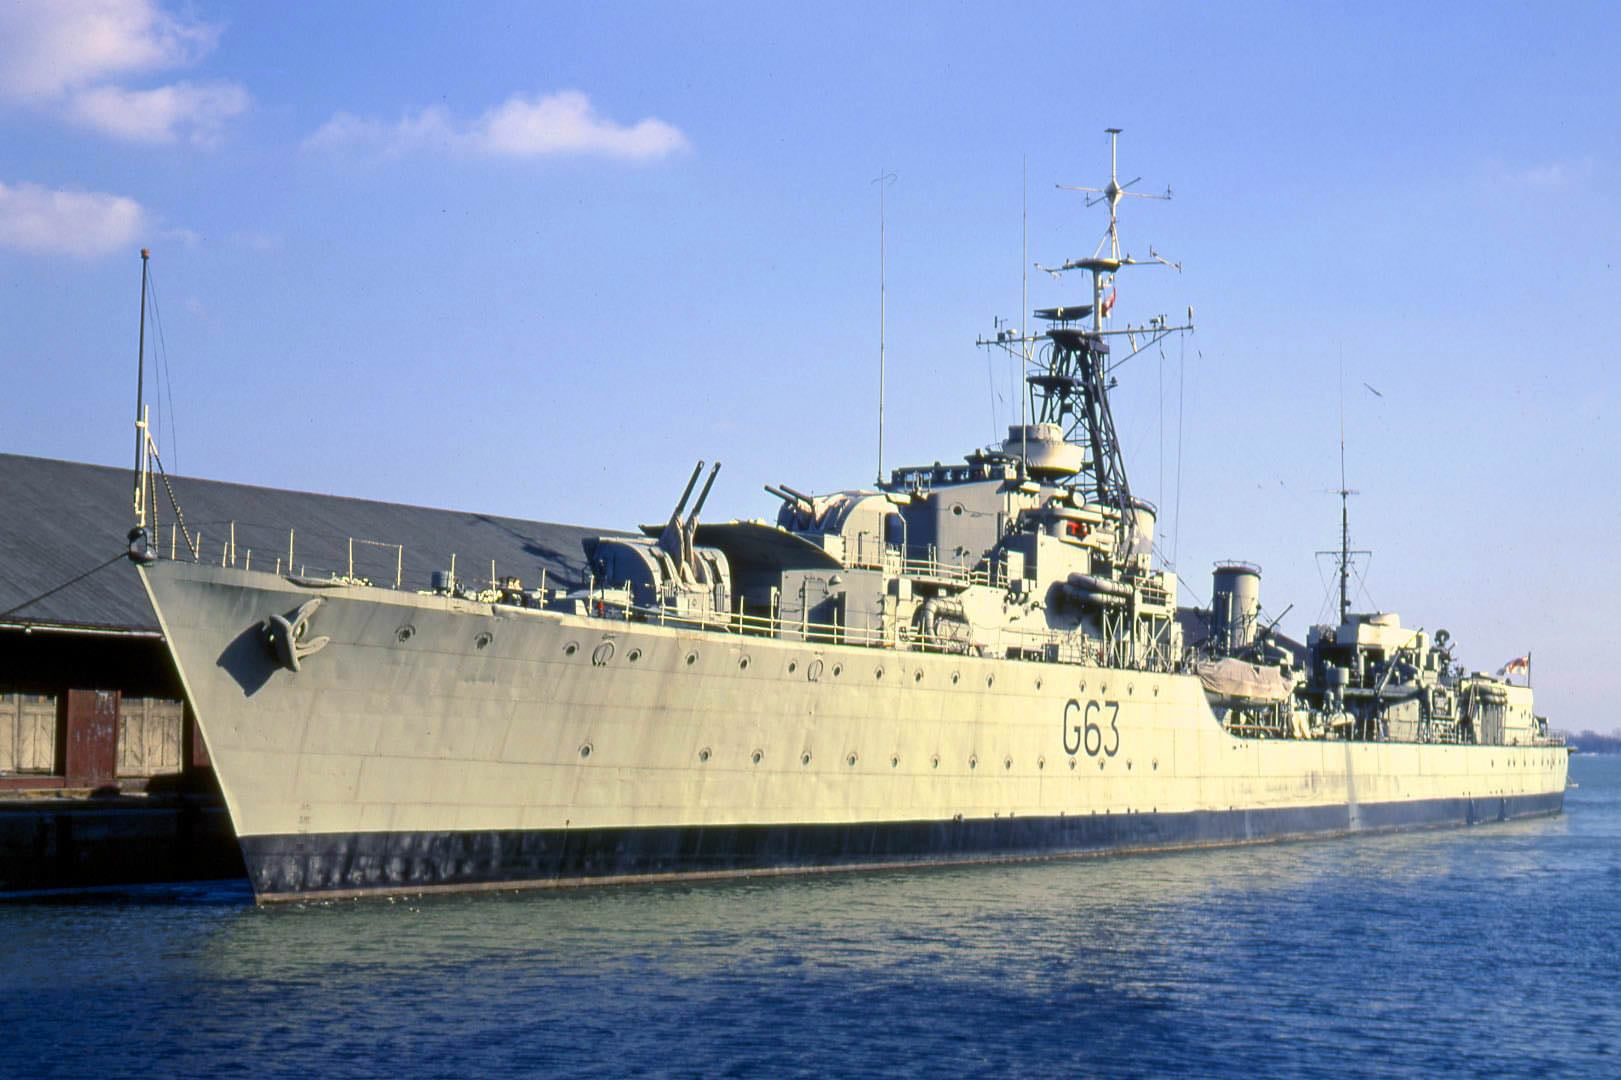 H.M.C.S. Haida when it was moored along a pier in Toronto's harbor, 1970